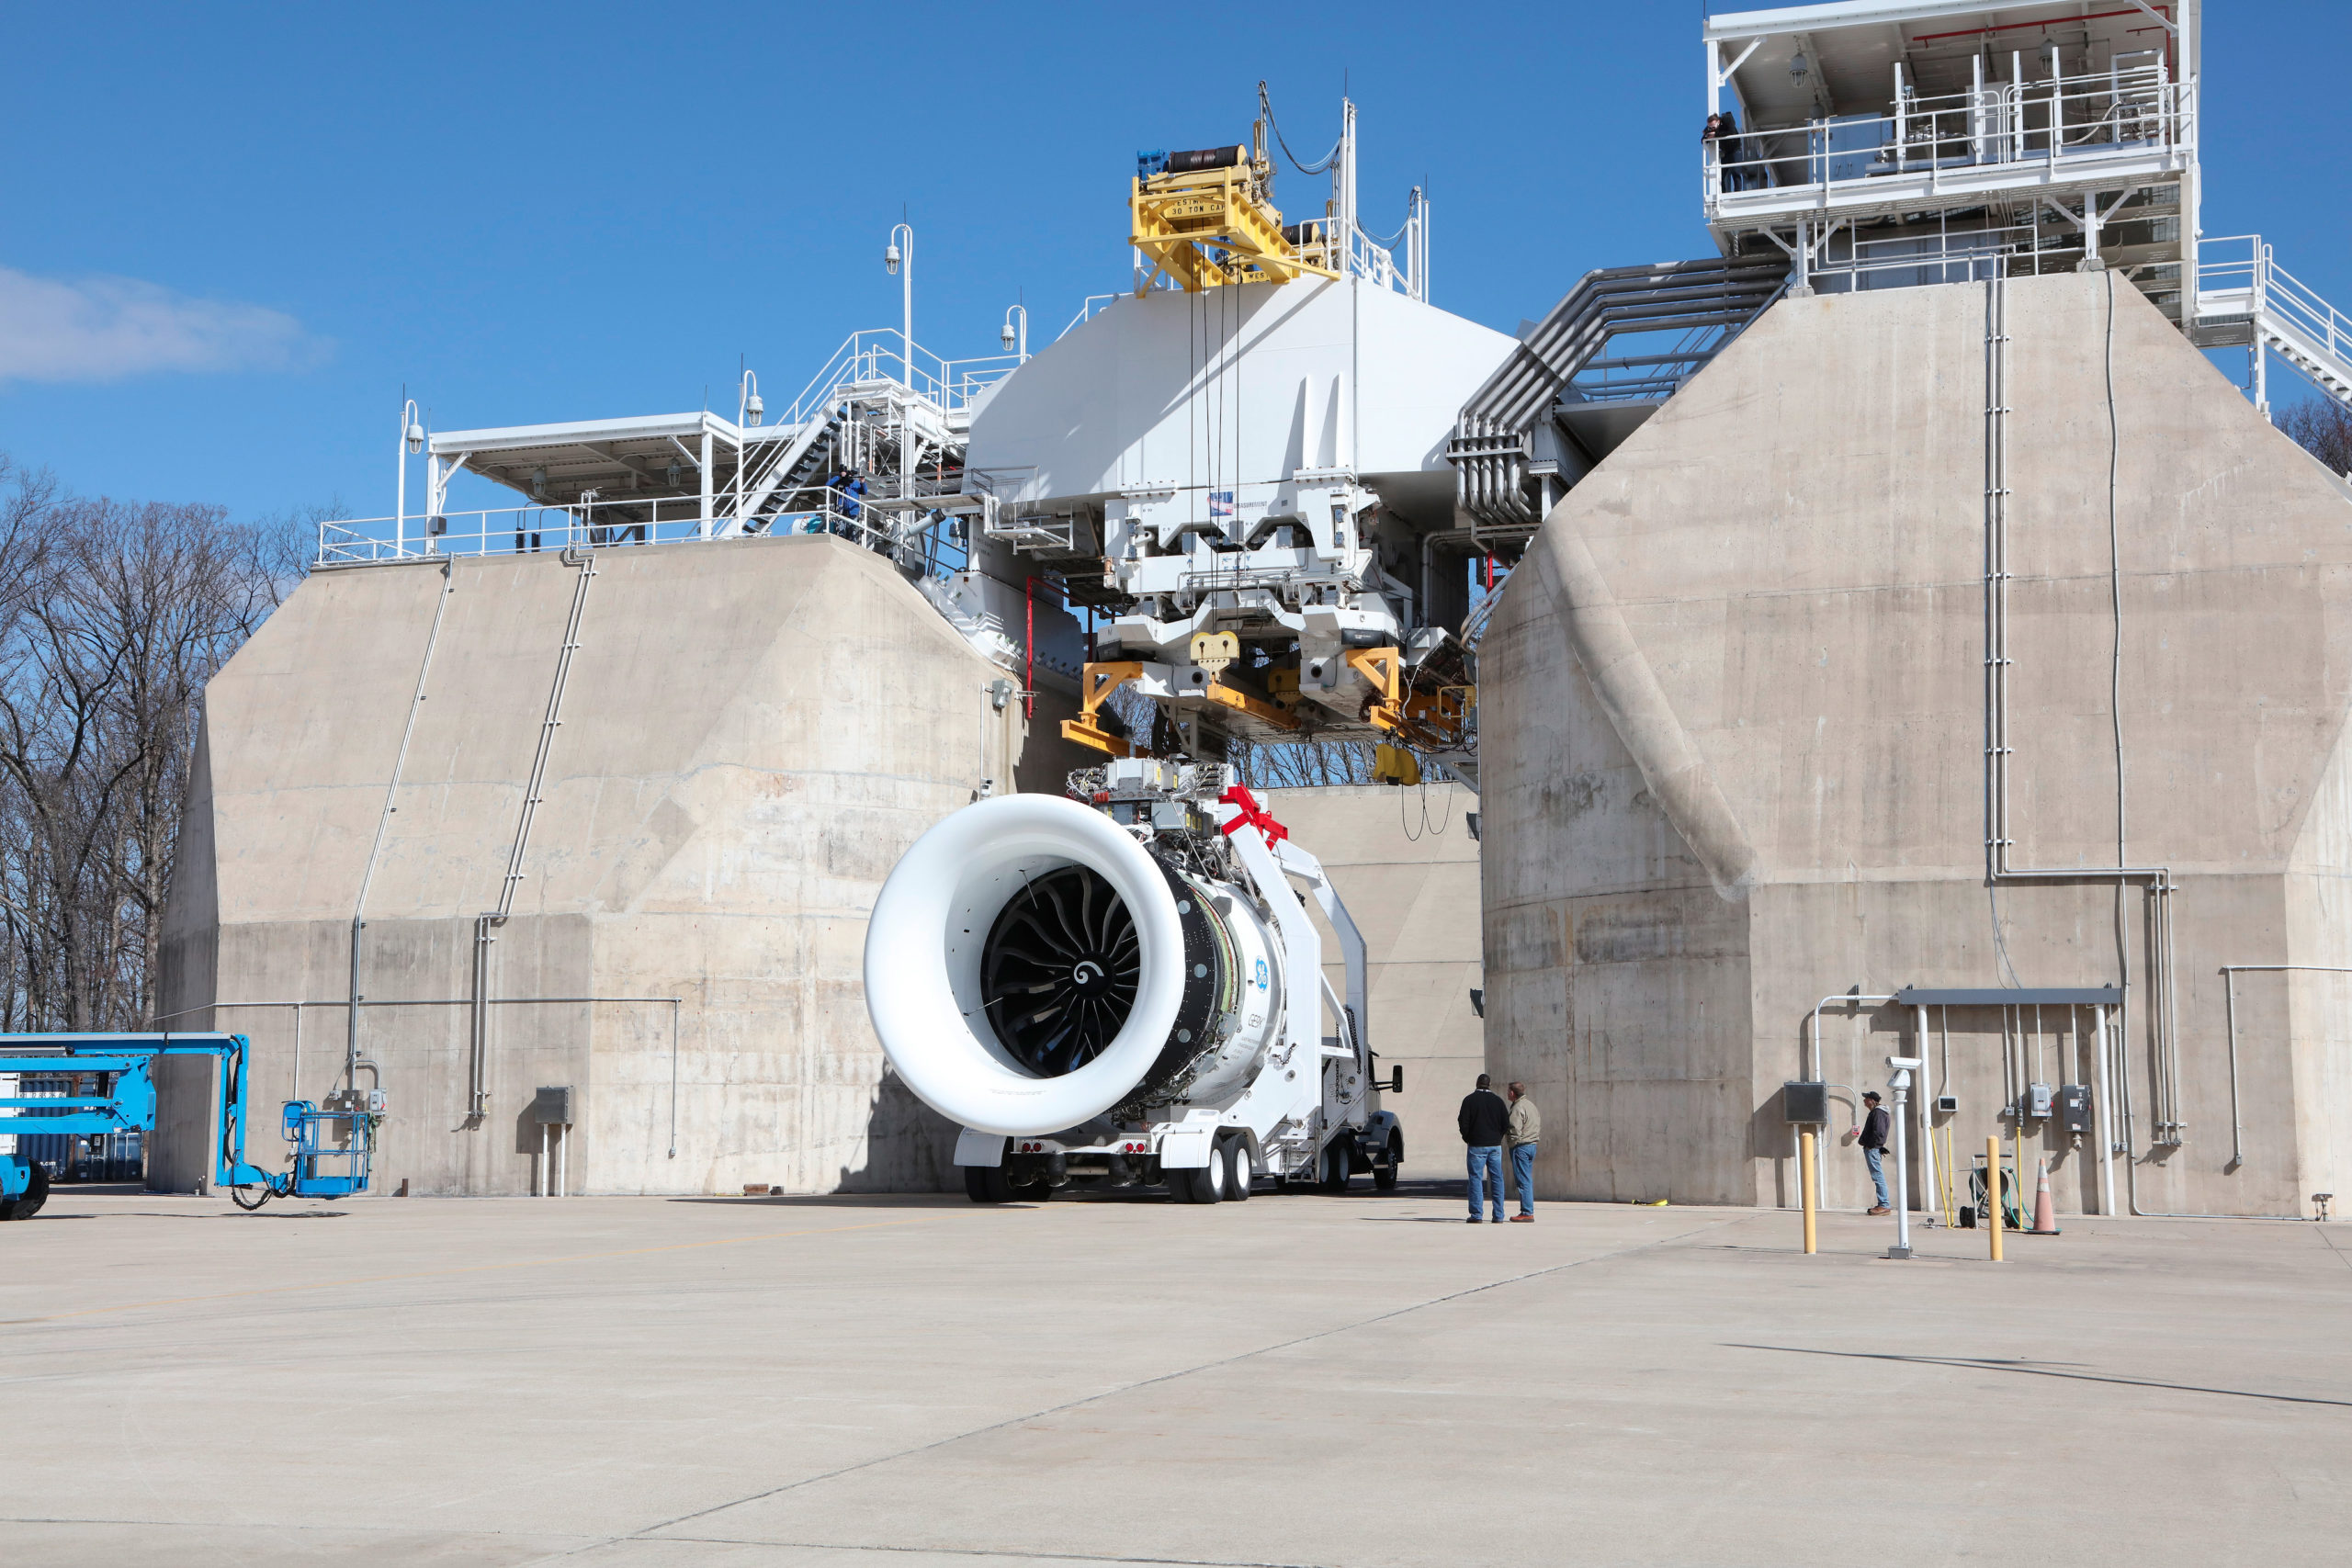 Here’s The World’s Largest Jet Engine